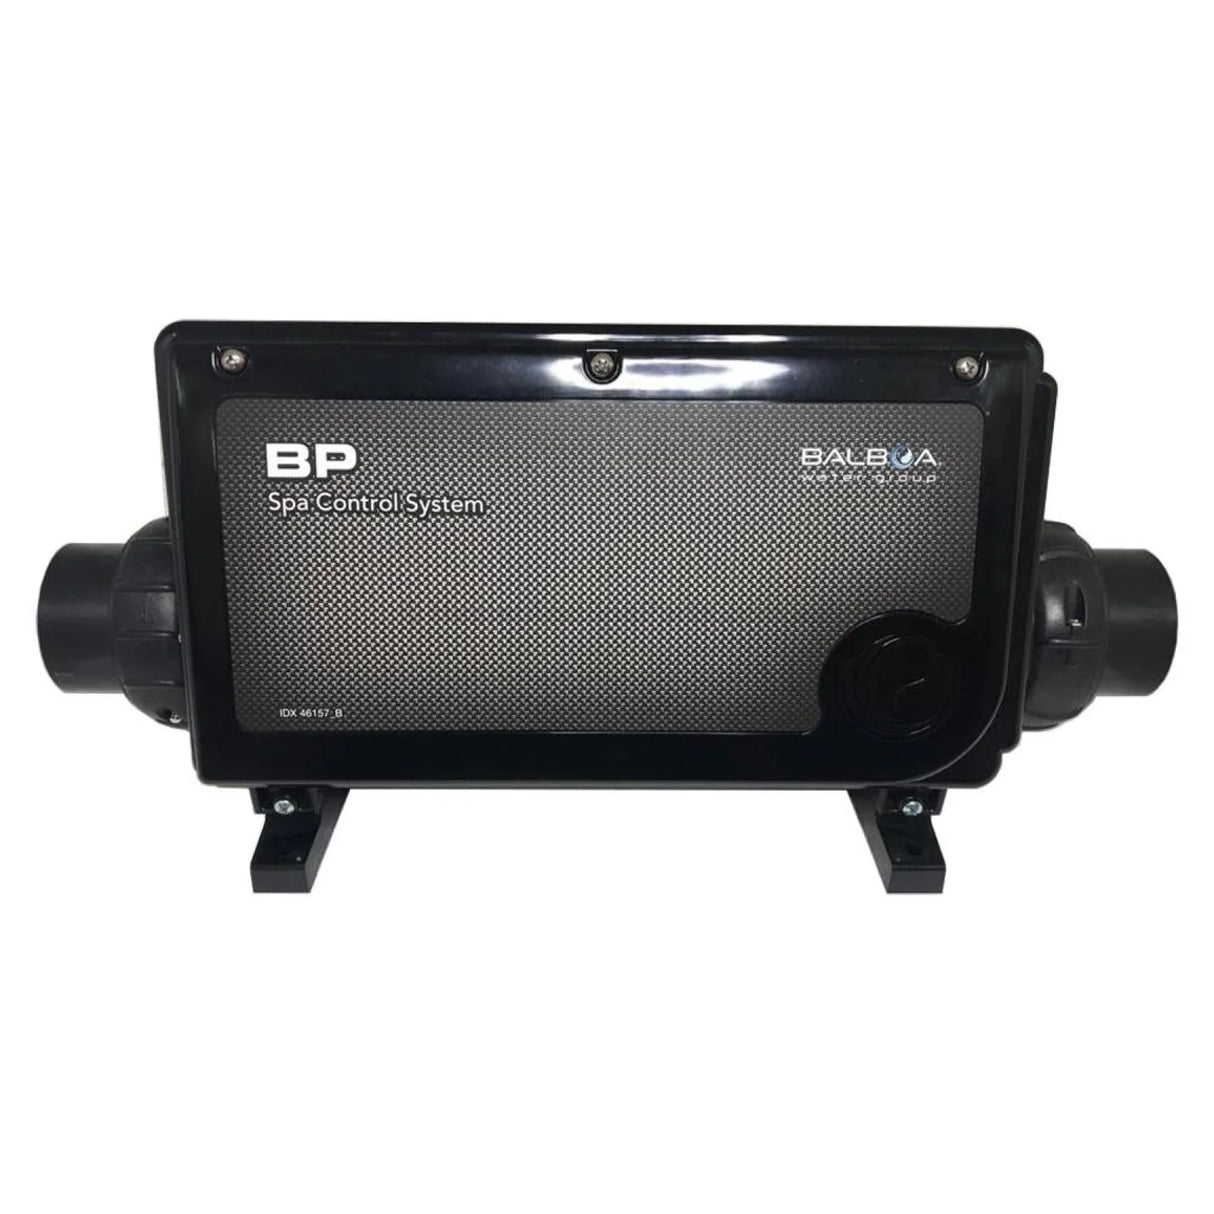 Balboa BP200 Controller with Pump Expander PCB - 2.0kW & 3.0kW Heater - Heater and Spa Parts